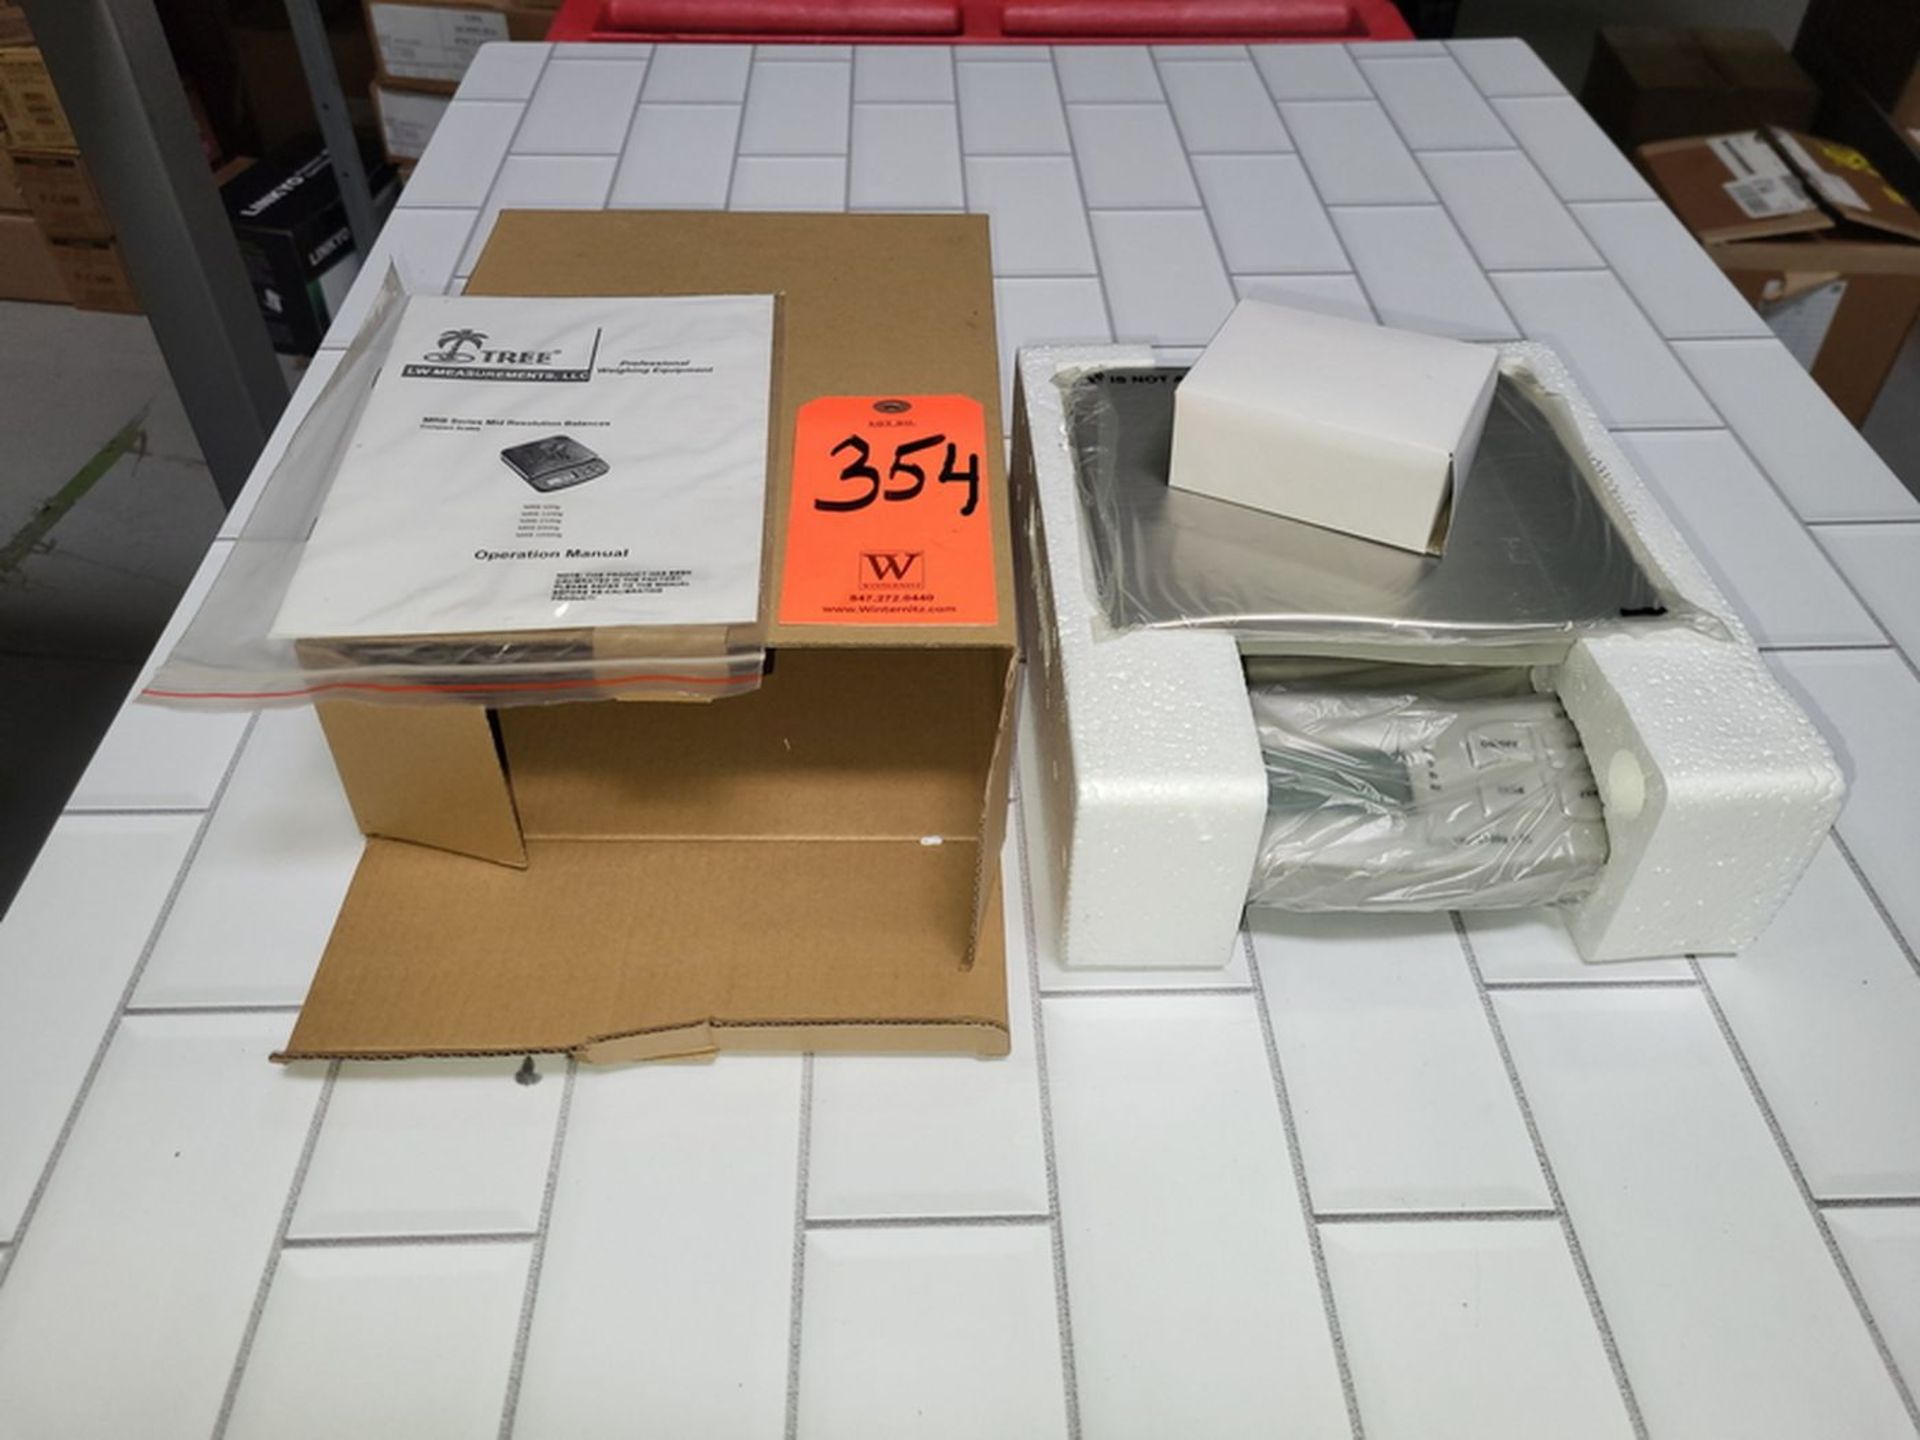 Tree Model MRB 6000 Analytical Balance, S/N: MR1703037; 6,000-g. x 1-g. Cap., New in Box with AC - Image 2 of 3